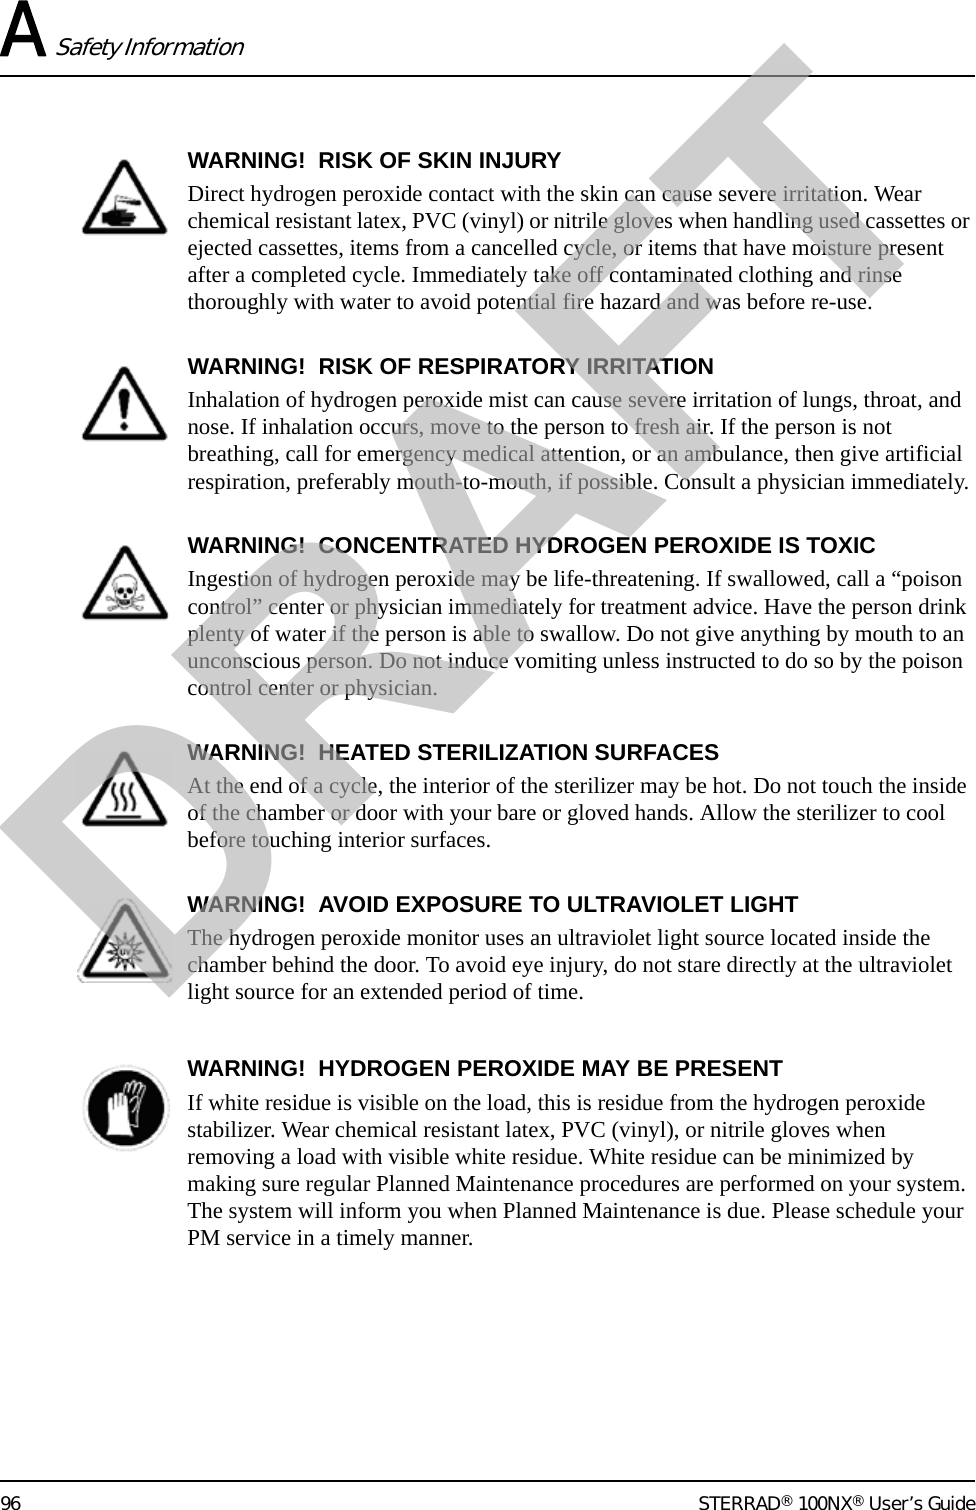 A Safety Information96 STERRAD® 100NX® User’s GuideWARNING!  RISK OF SKIN INJURYDirect hydrogen peroxide contact with the skin can cause severe irritation. Wear chemical resistant latex, PVC (vinyl) or nitrile gloves when handling used cassettes or ejected cassettes, items from a cancelled cycle, or items that have moisture present after a completed cycle. Immediately take off contaminated clothing and rinse thoroughly with water to avoid potential fire hazard and was before re-use.WARNING!  RISK OF RESPIRATORY IRRITATIONInhalation of hydrogen peroxide mist can cause severe irritation of lungs, throat, and nose. If inhalation occurs, move to the person to fresh air. If the person is not breathing, call for emergency medical attention, or an ambulance, then give artificial respiration, preferably mouth-to-mouth, if possible. Consult a physician immediately.WARNING!  CONCENTRATED HYDROGEN PEROXIDE IS TOXICIngestion of hydrogen peroxide may be life-threatening. If swallowed, call a “poison control” center or physician immediately for treatment advice. Have the person drink plenty of water if the person is able to swallow. Do not give anything by mouth to an unconscious person. Do not induce vomiting unless instructed to do so by the poison control center or physician.WARNING!  HEATED STERILIZATION SURFACESAt the end of a cycle, the interior of the sterilizer may be hot. Do not touch the inside of the chamber or door with your bare or gloved hands. Allow the sterilizer to cool before touching interior surfaces.WARNING!  AVOID EXPOSURE TO ULTRAVIOLET LIGHTThe hydrogen peroxide monitor uses an ultraviolet light source located inside the chamber behind the door. To avoid eye injury, do not stare directly at the ultraviolet light source for an extended period of time.WARNING!  HYDROGEN PEROXIDE MAY BE PRESENTIf white residue is visible on the load, this is residue from the hydrogen peroxide stabilizer. Wear chemical resistant latex, PVC (vinyl), or nitrile gloves when removing a load with visible white residue. White residue can be minimized by making sure regular Planned Maintenance procedures are performed on your system. The system will inform you when Planned Maintenance is due. Please schedule your PM service in a timely manner.DRAFT